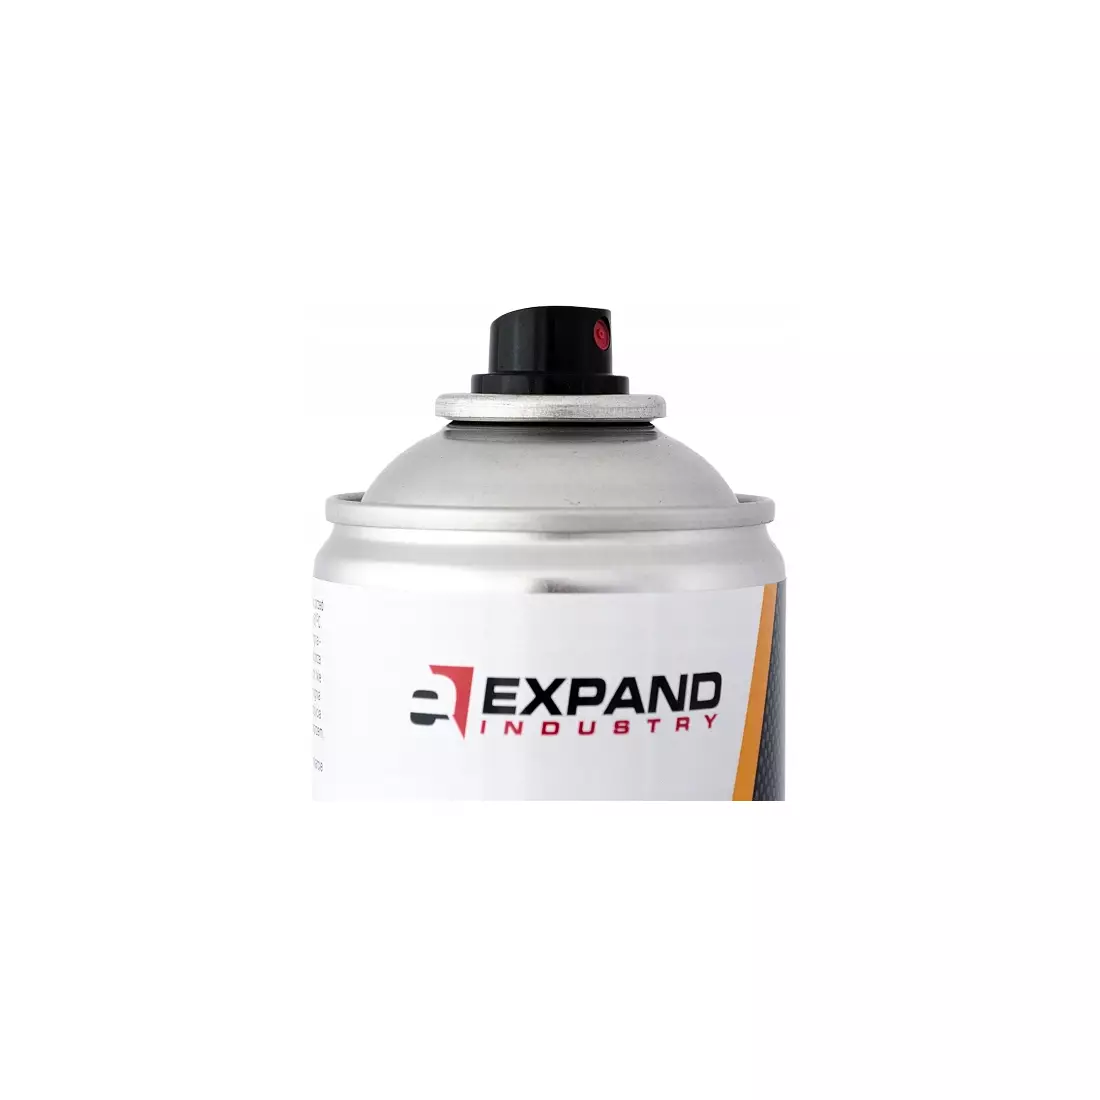 EXPAND GLUE OFF Adhesive preparation / remover, 400 ml